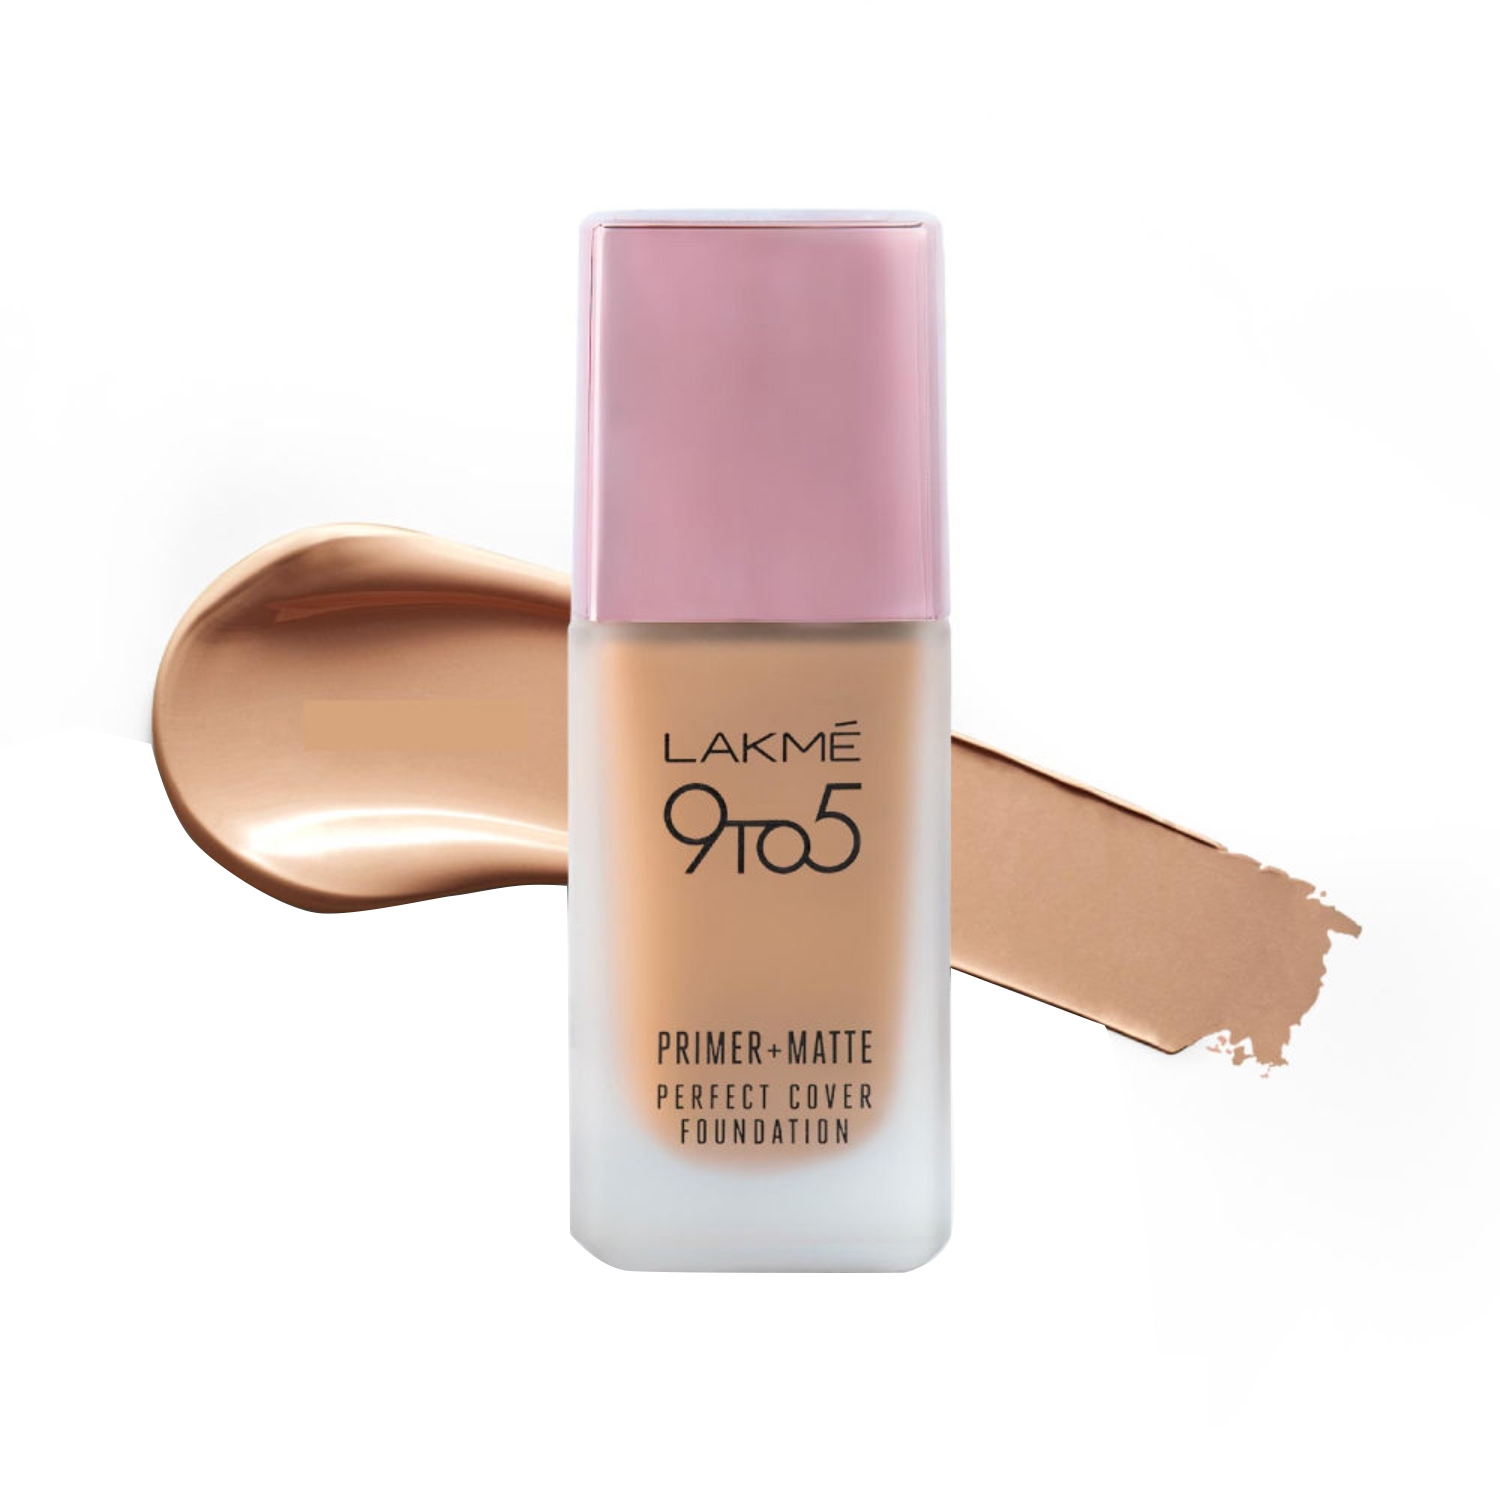 Lakme | Lakme 9 To 5 Primer + Matte Perfect Cover Foundation - N200 Neutral Nude (25ml)